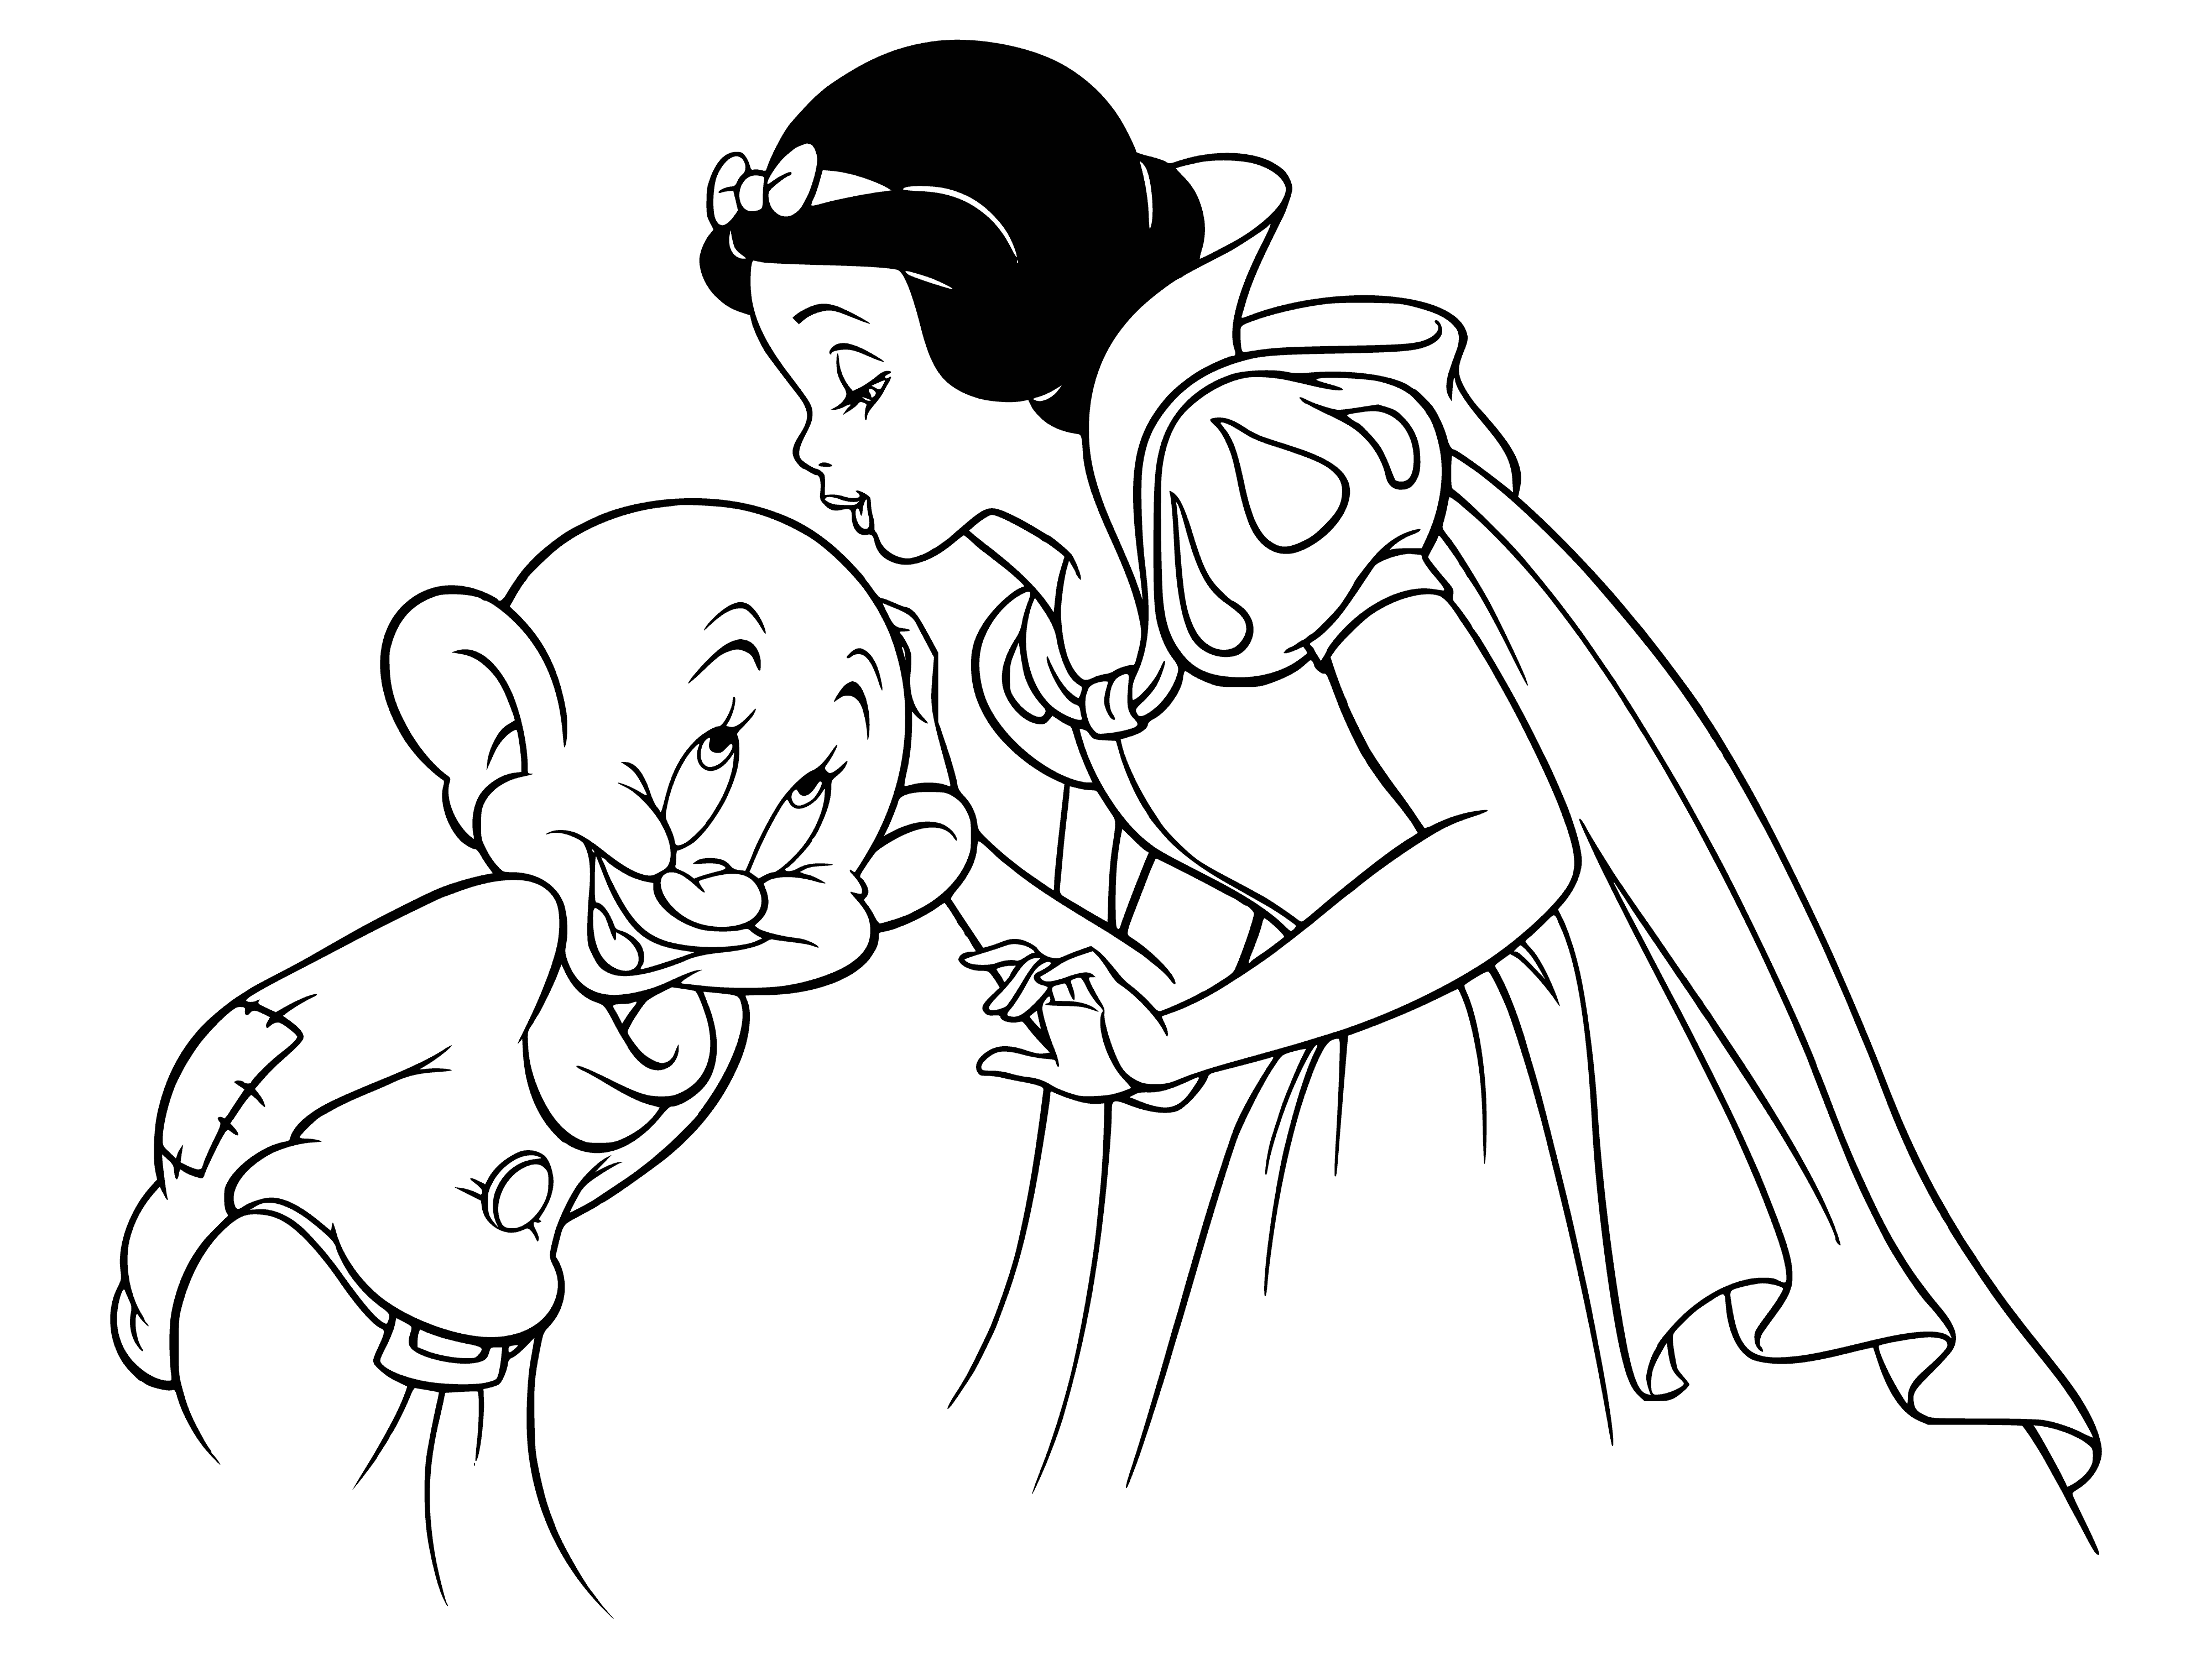 coloring page: Snow White stands before seven dwarfs, smiling with a book in her hand, bringing joy to them all.